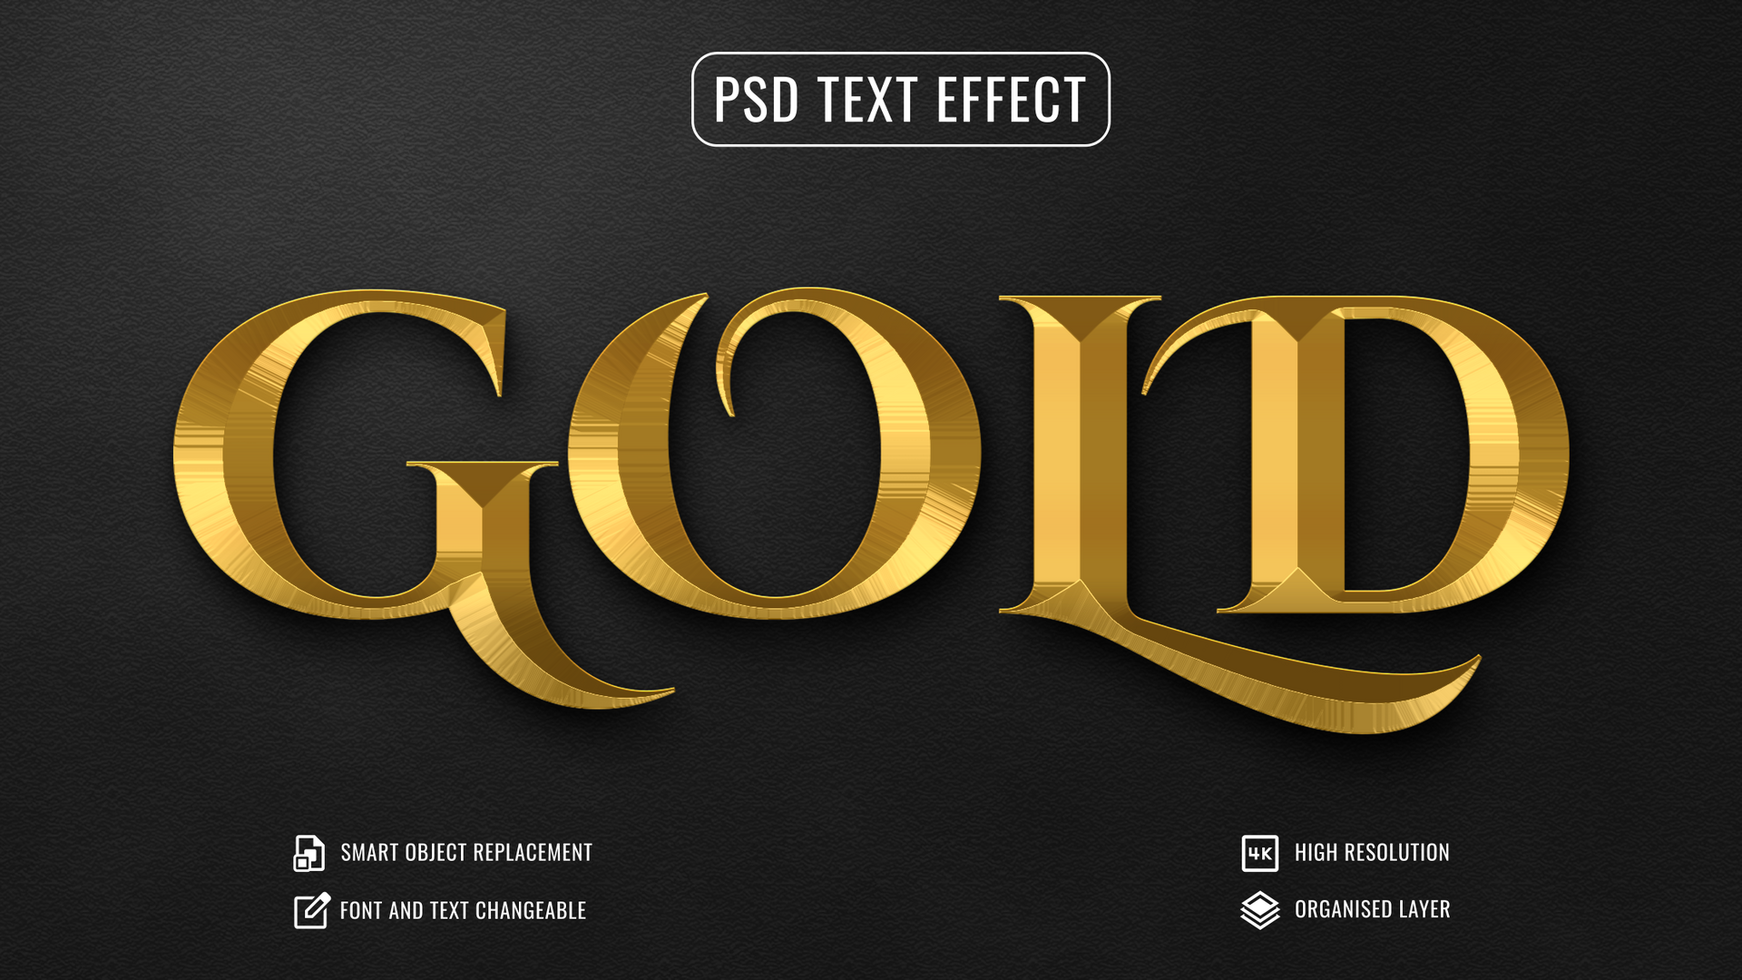 luxury font style mockup, shining gold editable 3d text effect psd